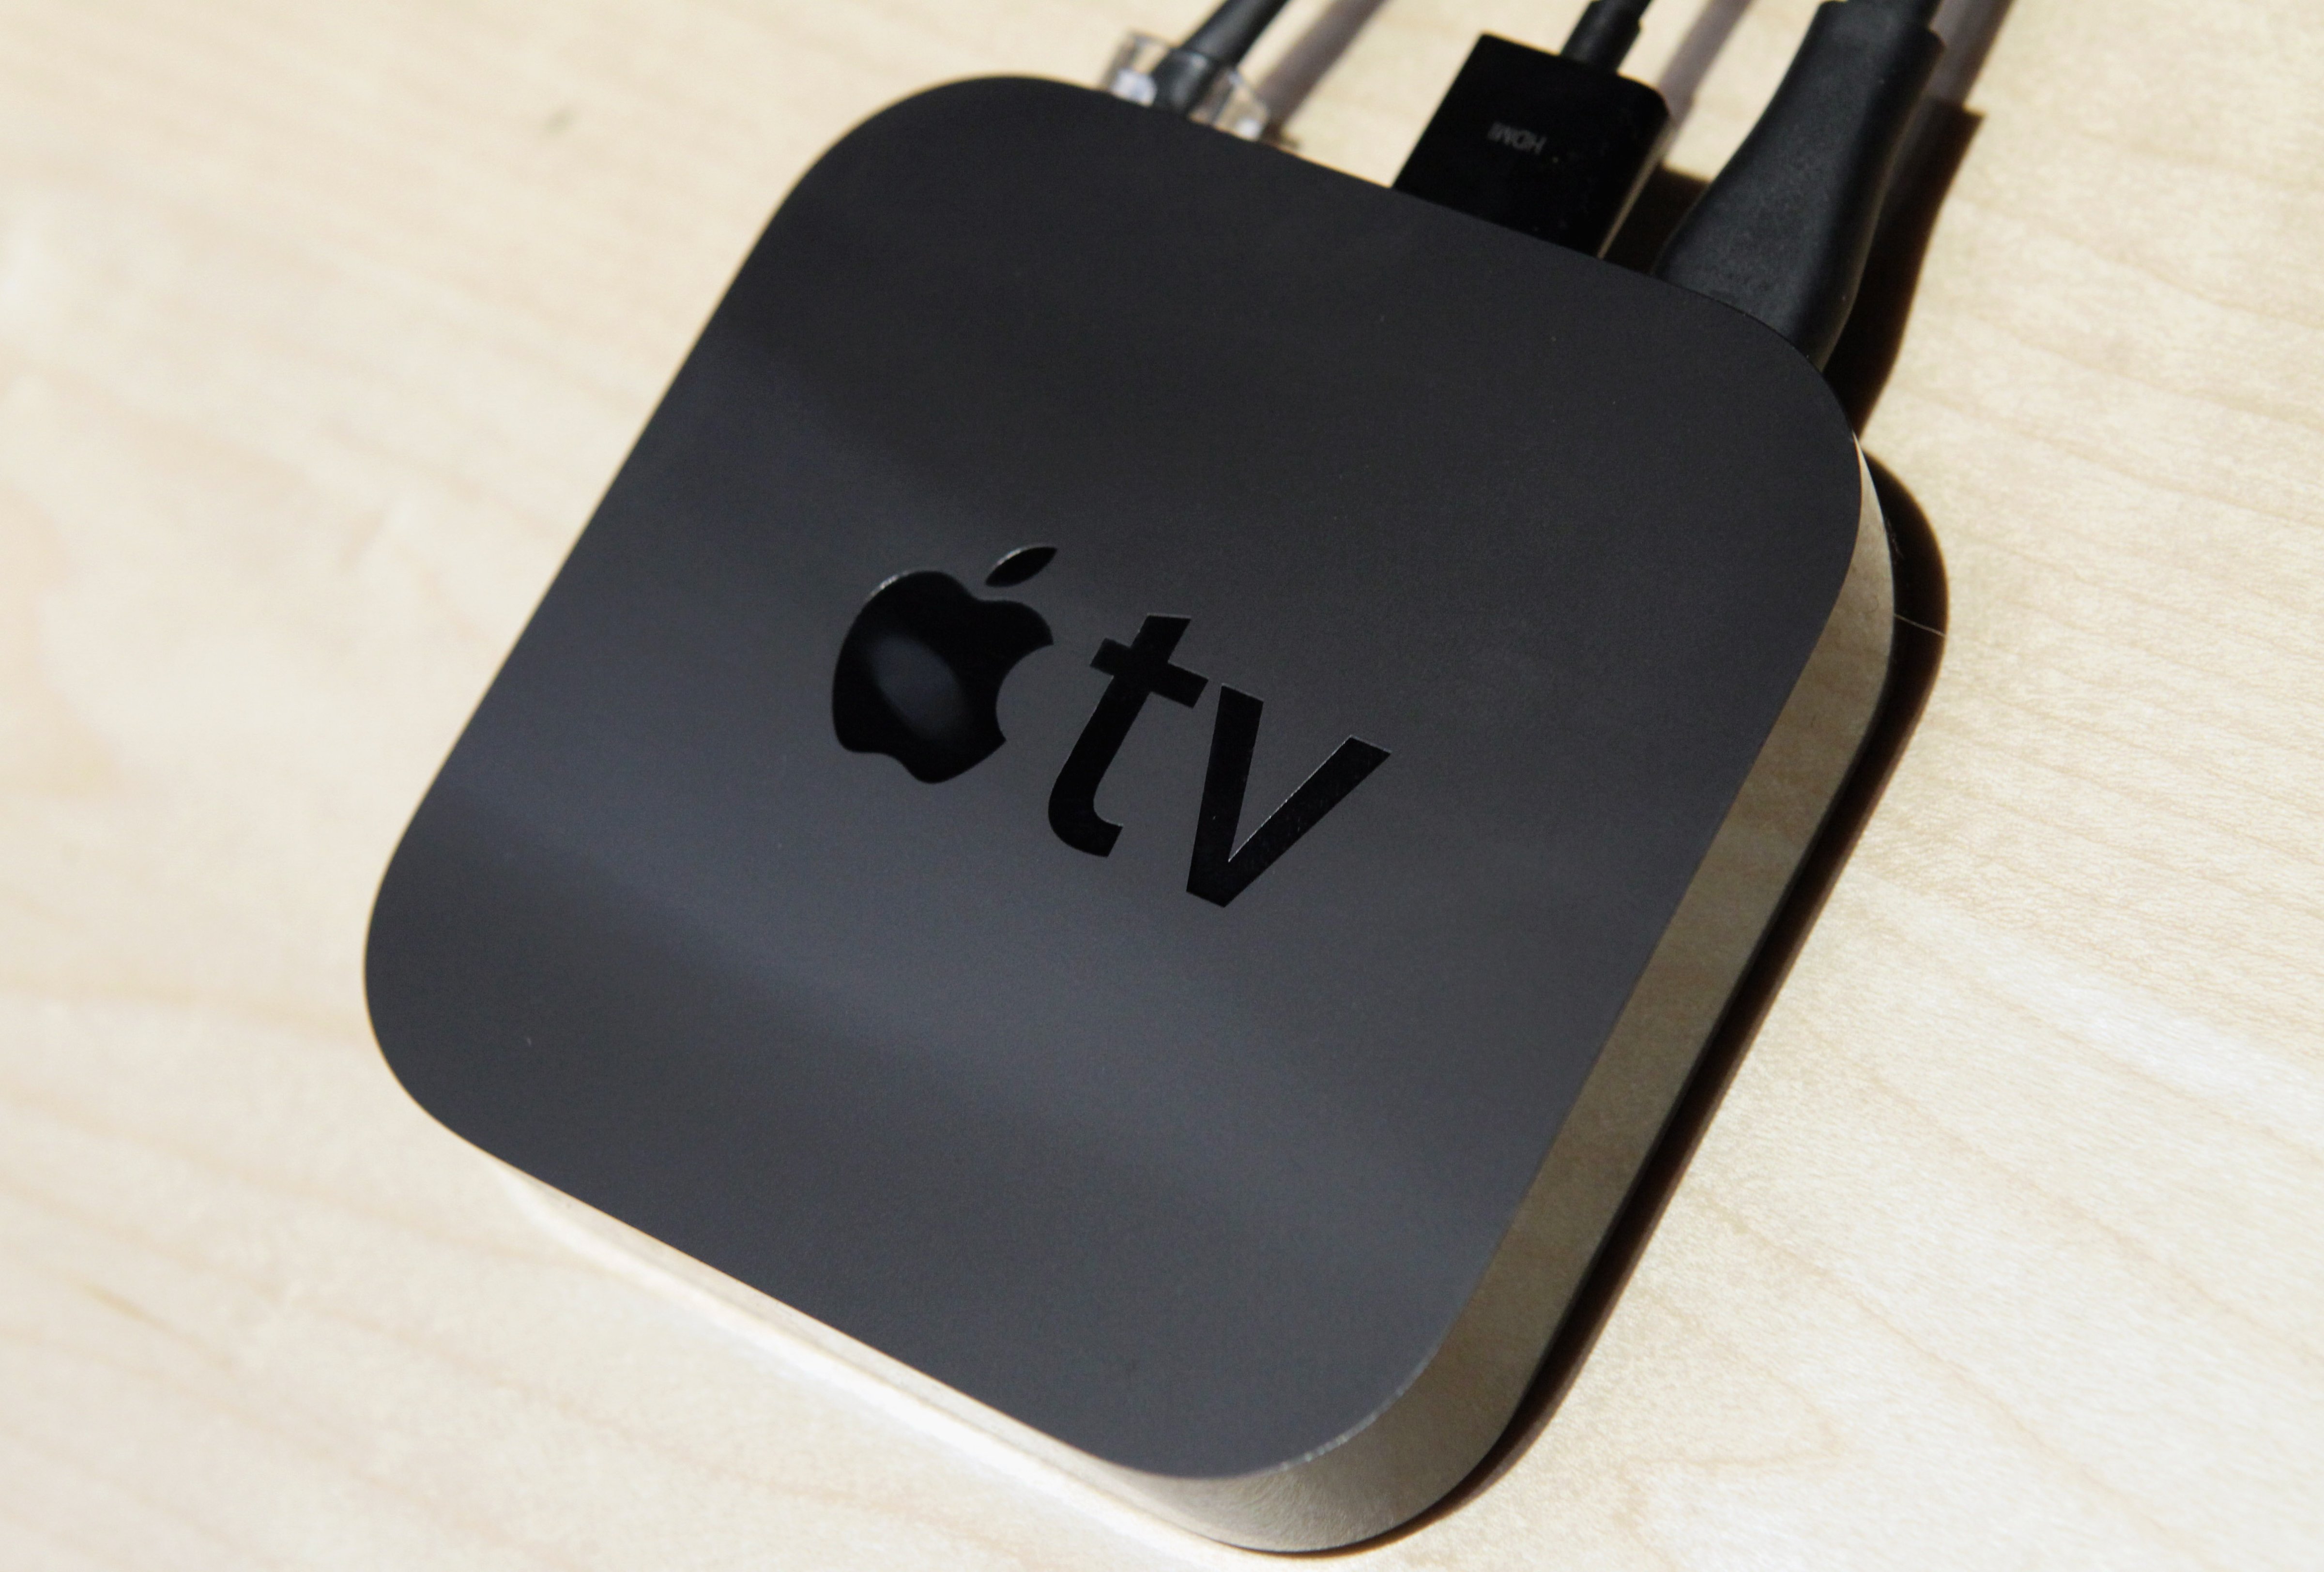 The new smaller version of Apple TV is displayed at an Apple Special Event at the Yerba Buena Center for the Arts September 1, 2010 in San Francisco, California. (Justin Sullivan—Getty Images)